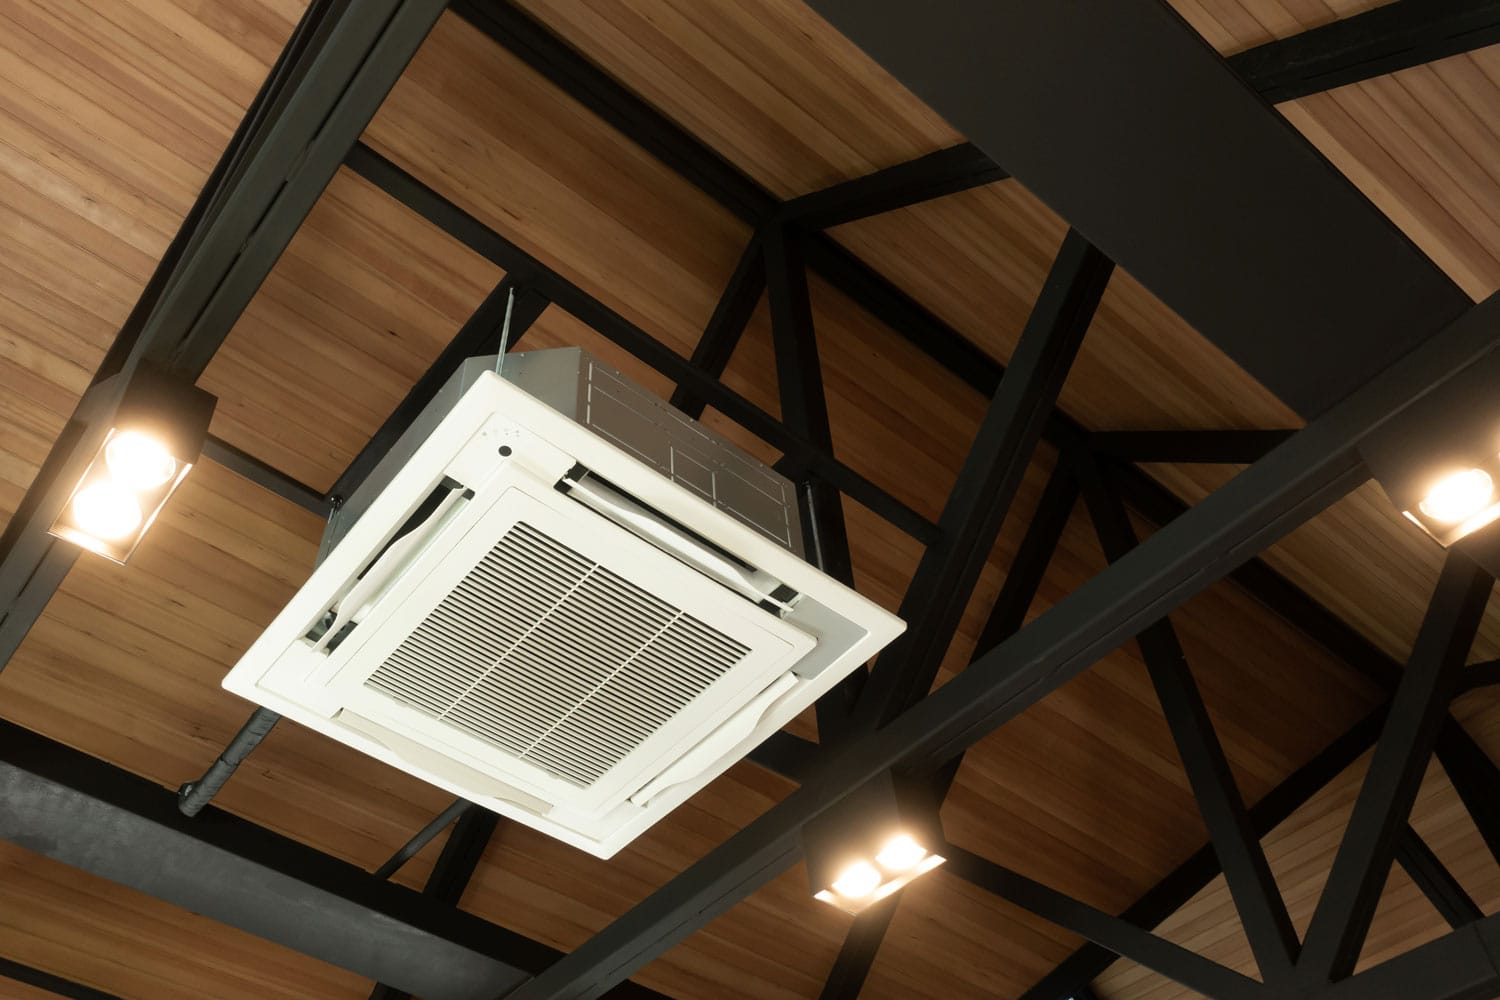 An AC unit mounted on reinforce metal ceiling framing